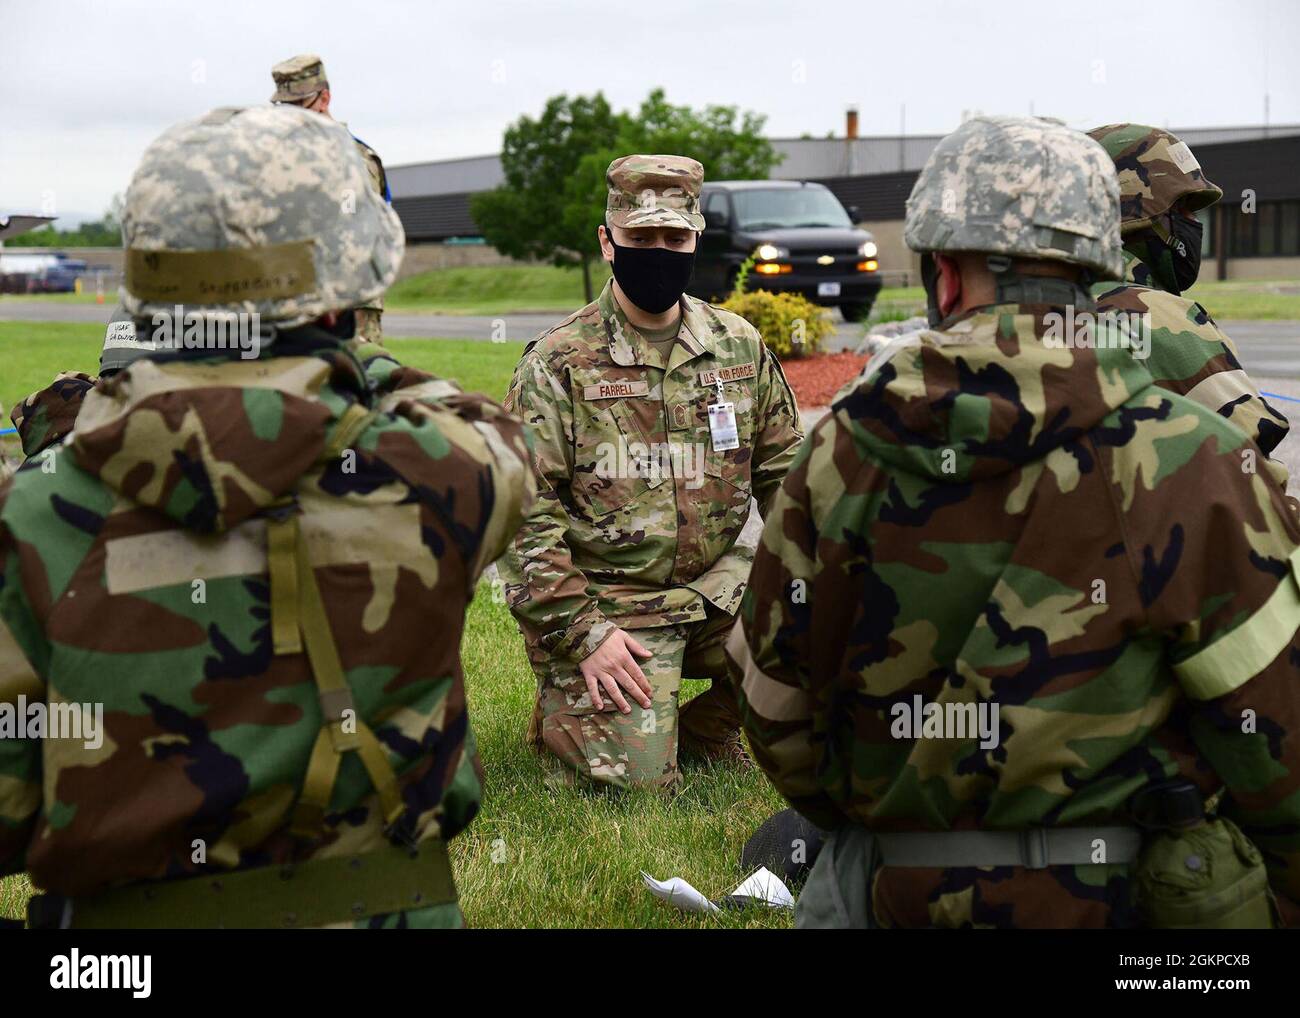 Chief Master Sgt. Robert Farrell, an Inspector General Staff member assigned to the 105th Airlift Wing, instructs Airmen during a large scale readiness exercise at Stewart Air National Guard Base, N.Y. June 12, 2021. Stock Photo